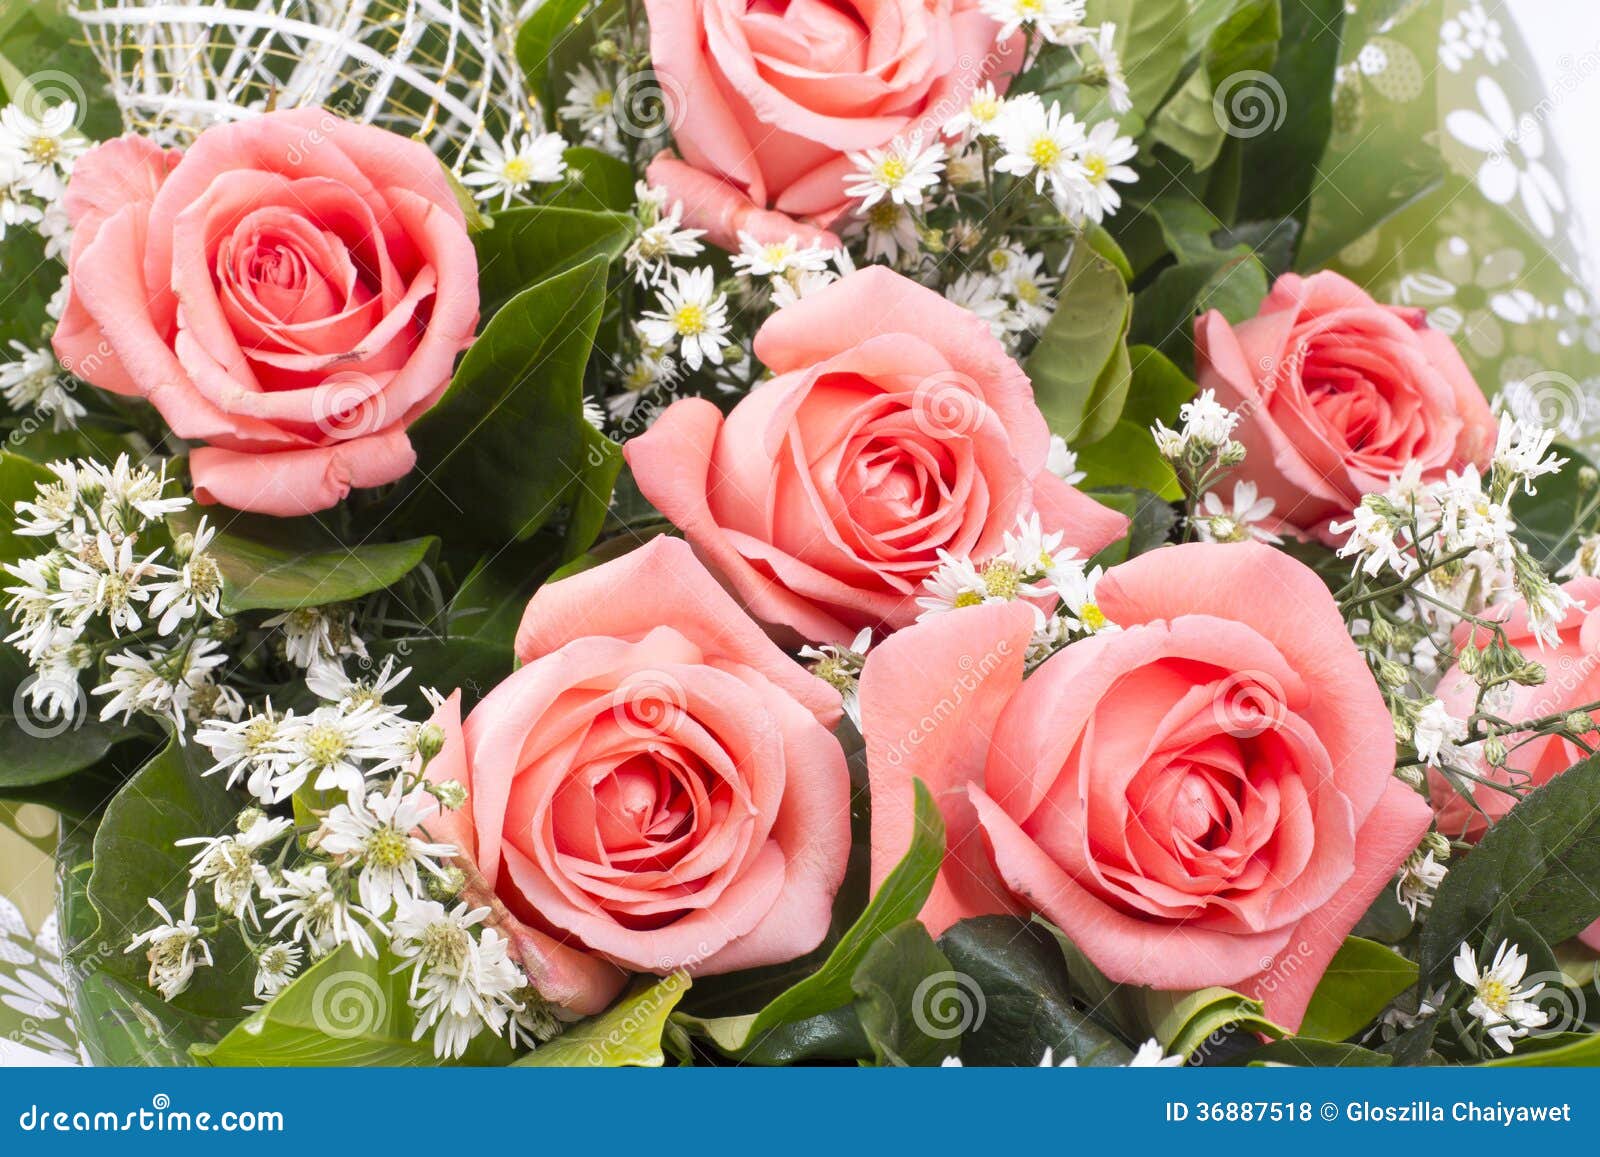 Background Image of Pink Roses Stock Photo - Image of gentle, greeting ...